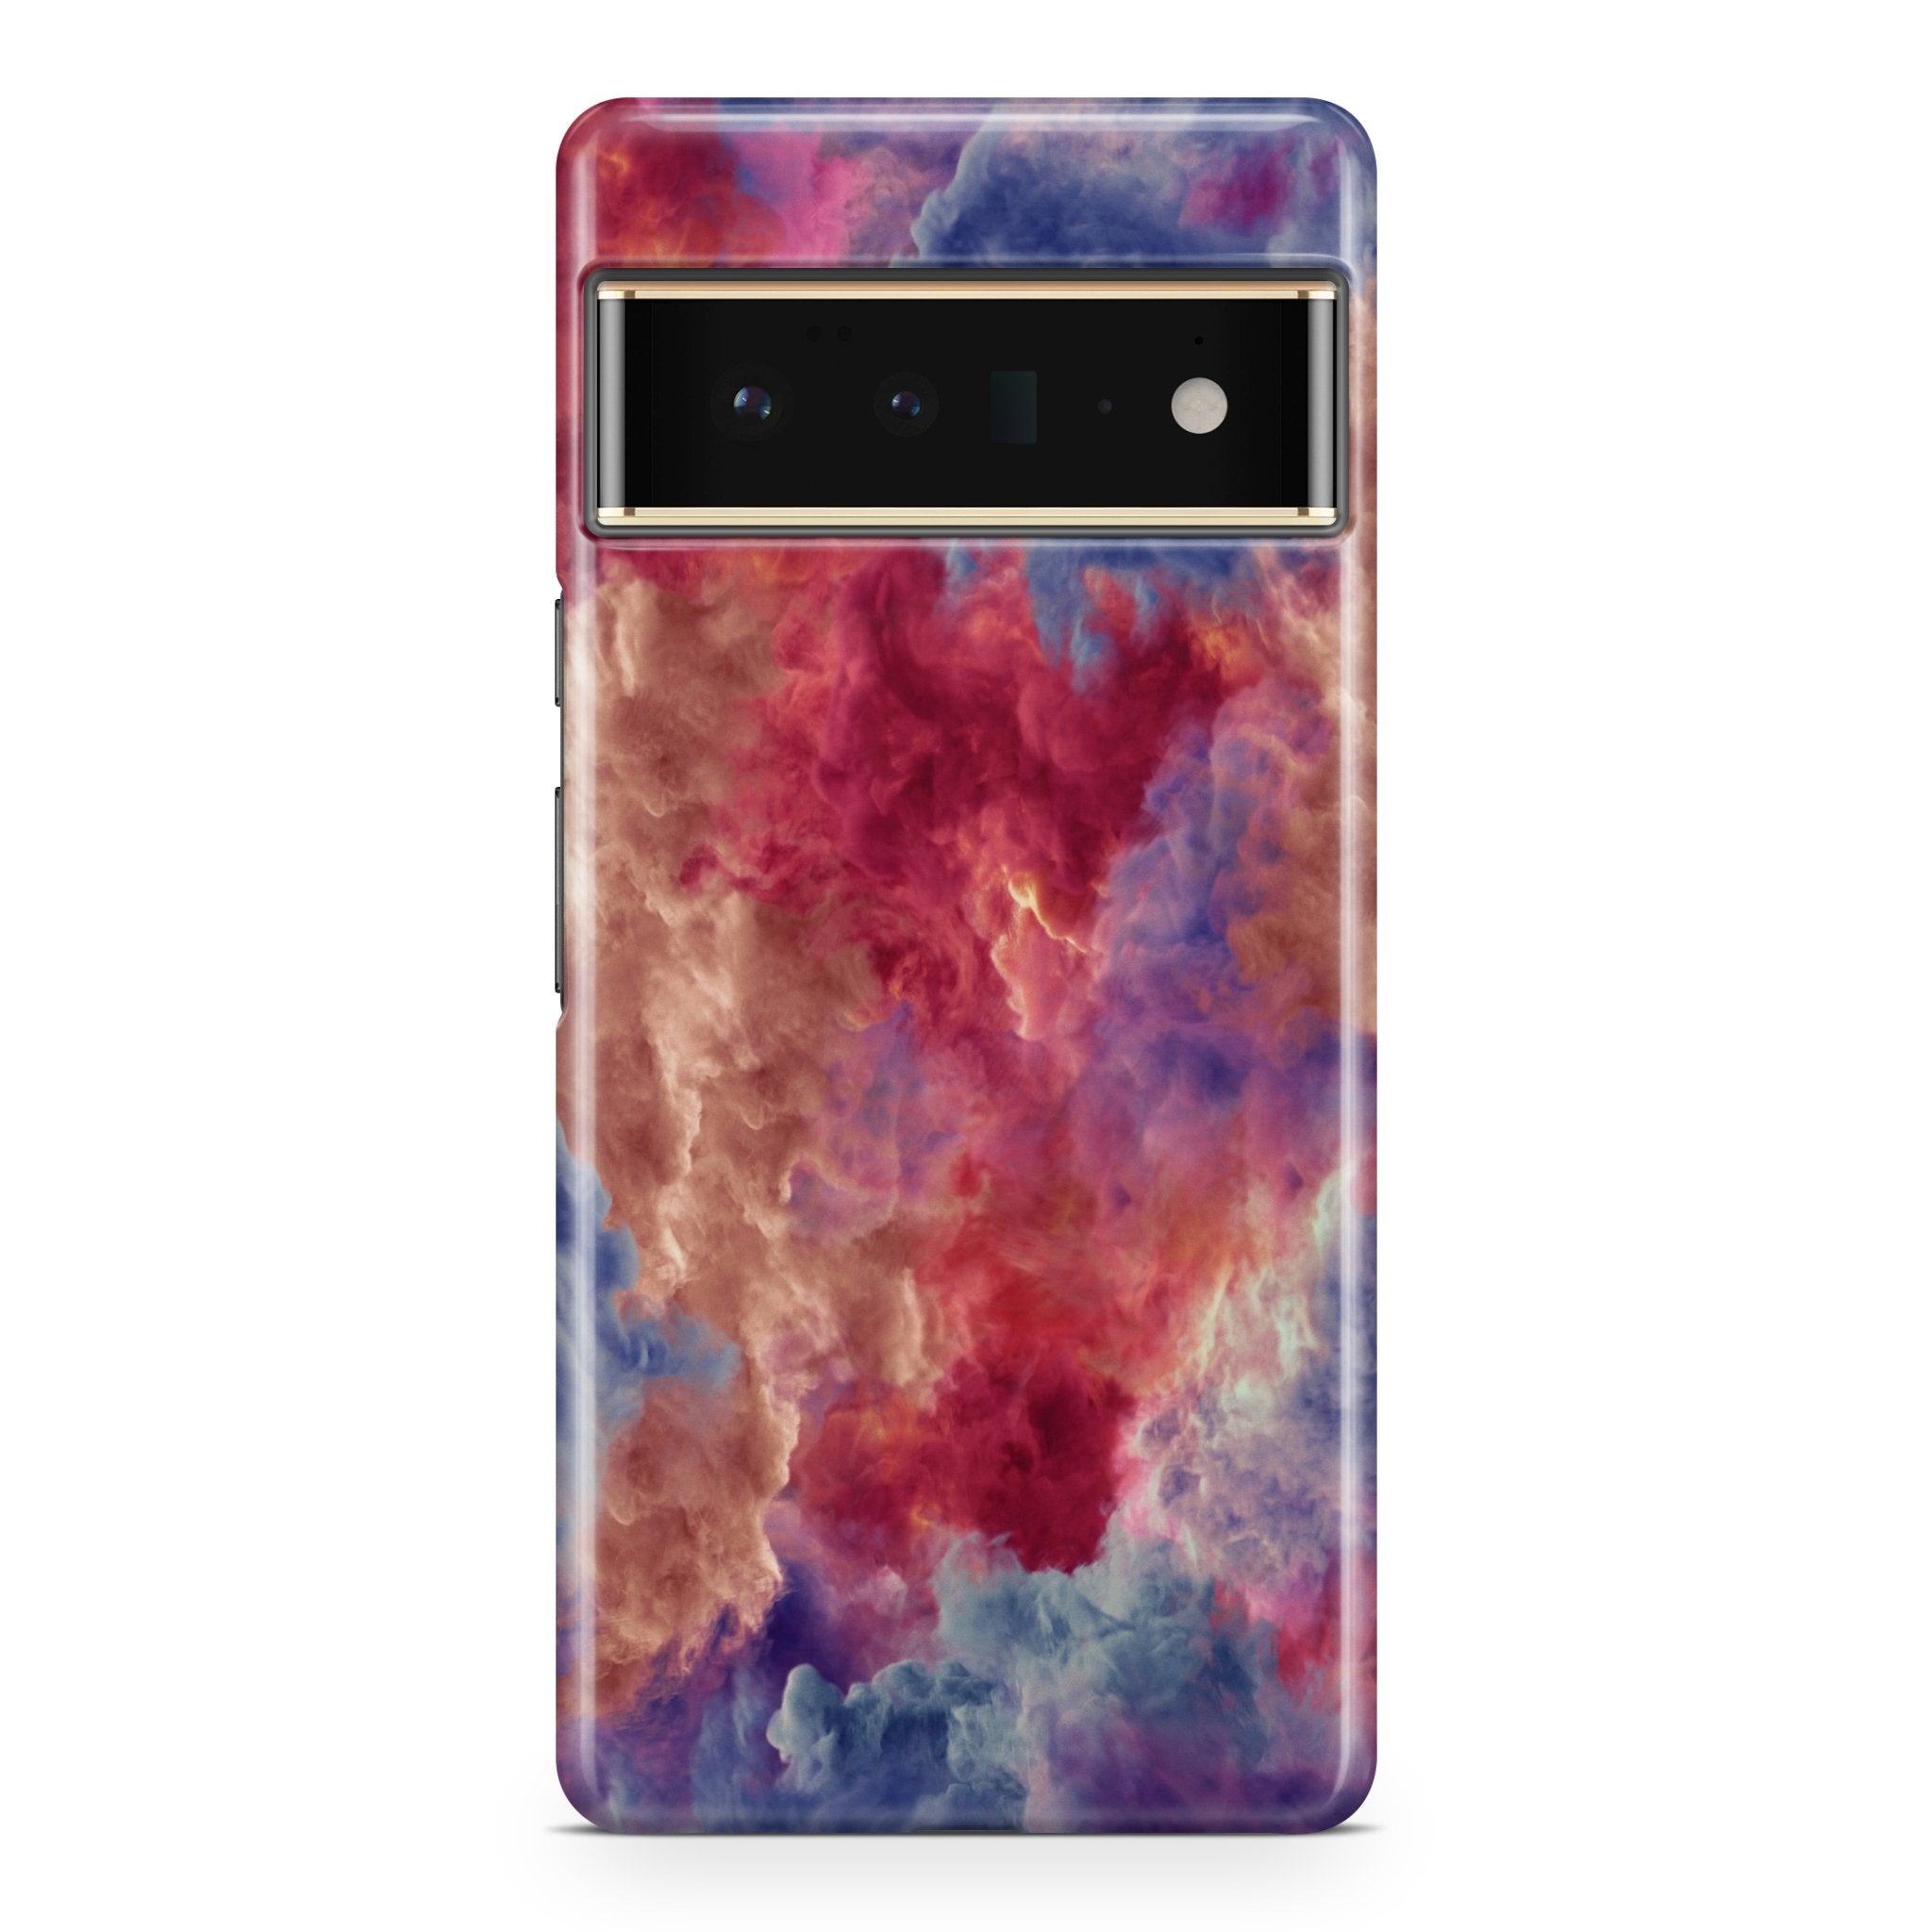 Red & Blue Smoke Cloud - Google phone case designs by CaseSwagger